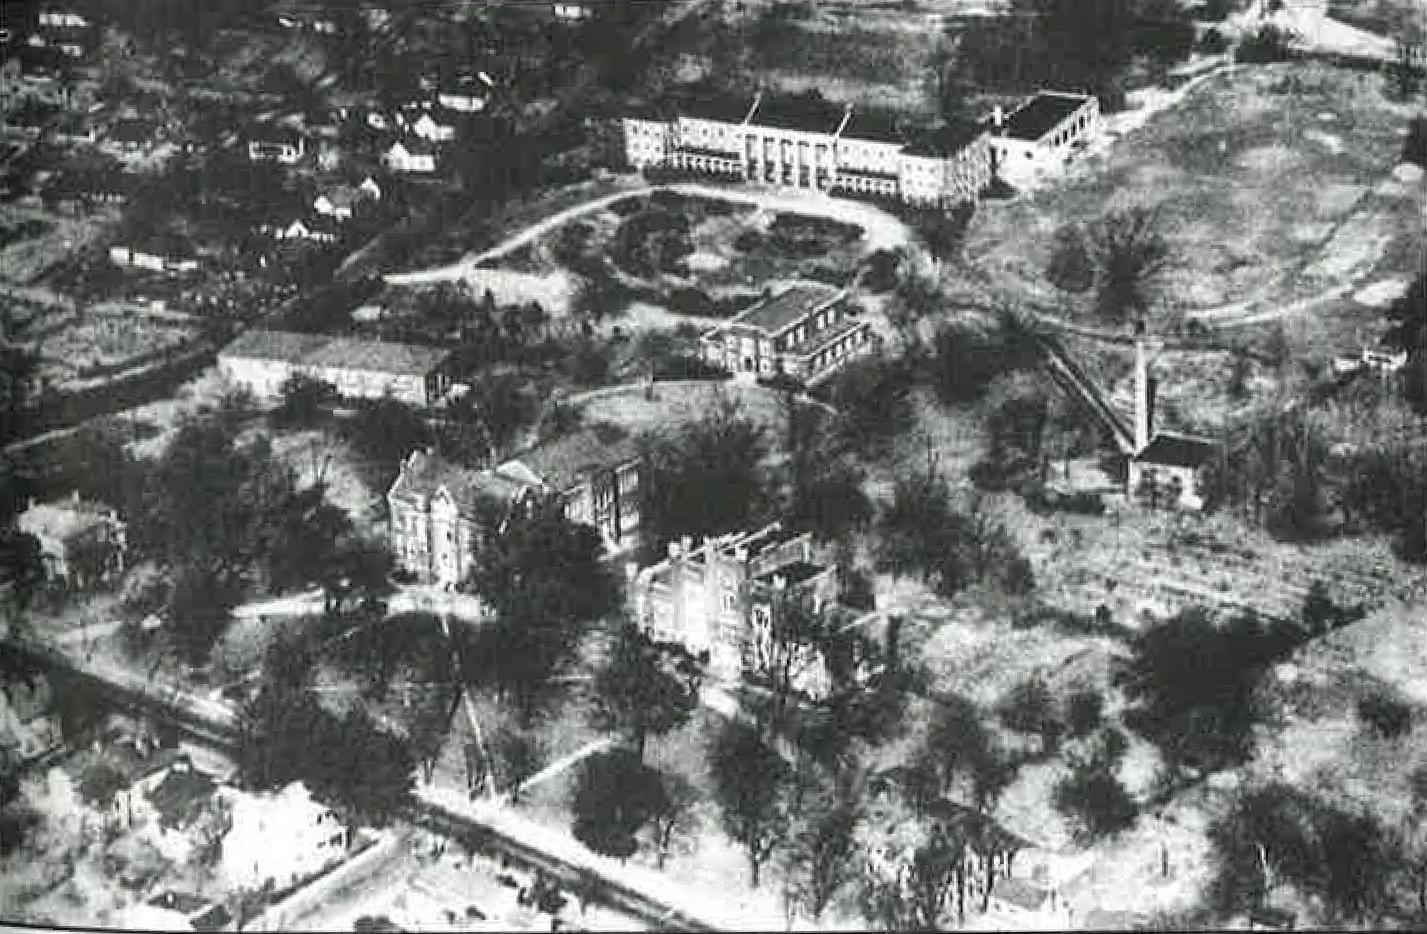 Harned Hall, pictured top middle, is the only building still standing from this aerial image circa 1935.